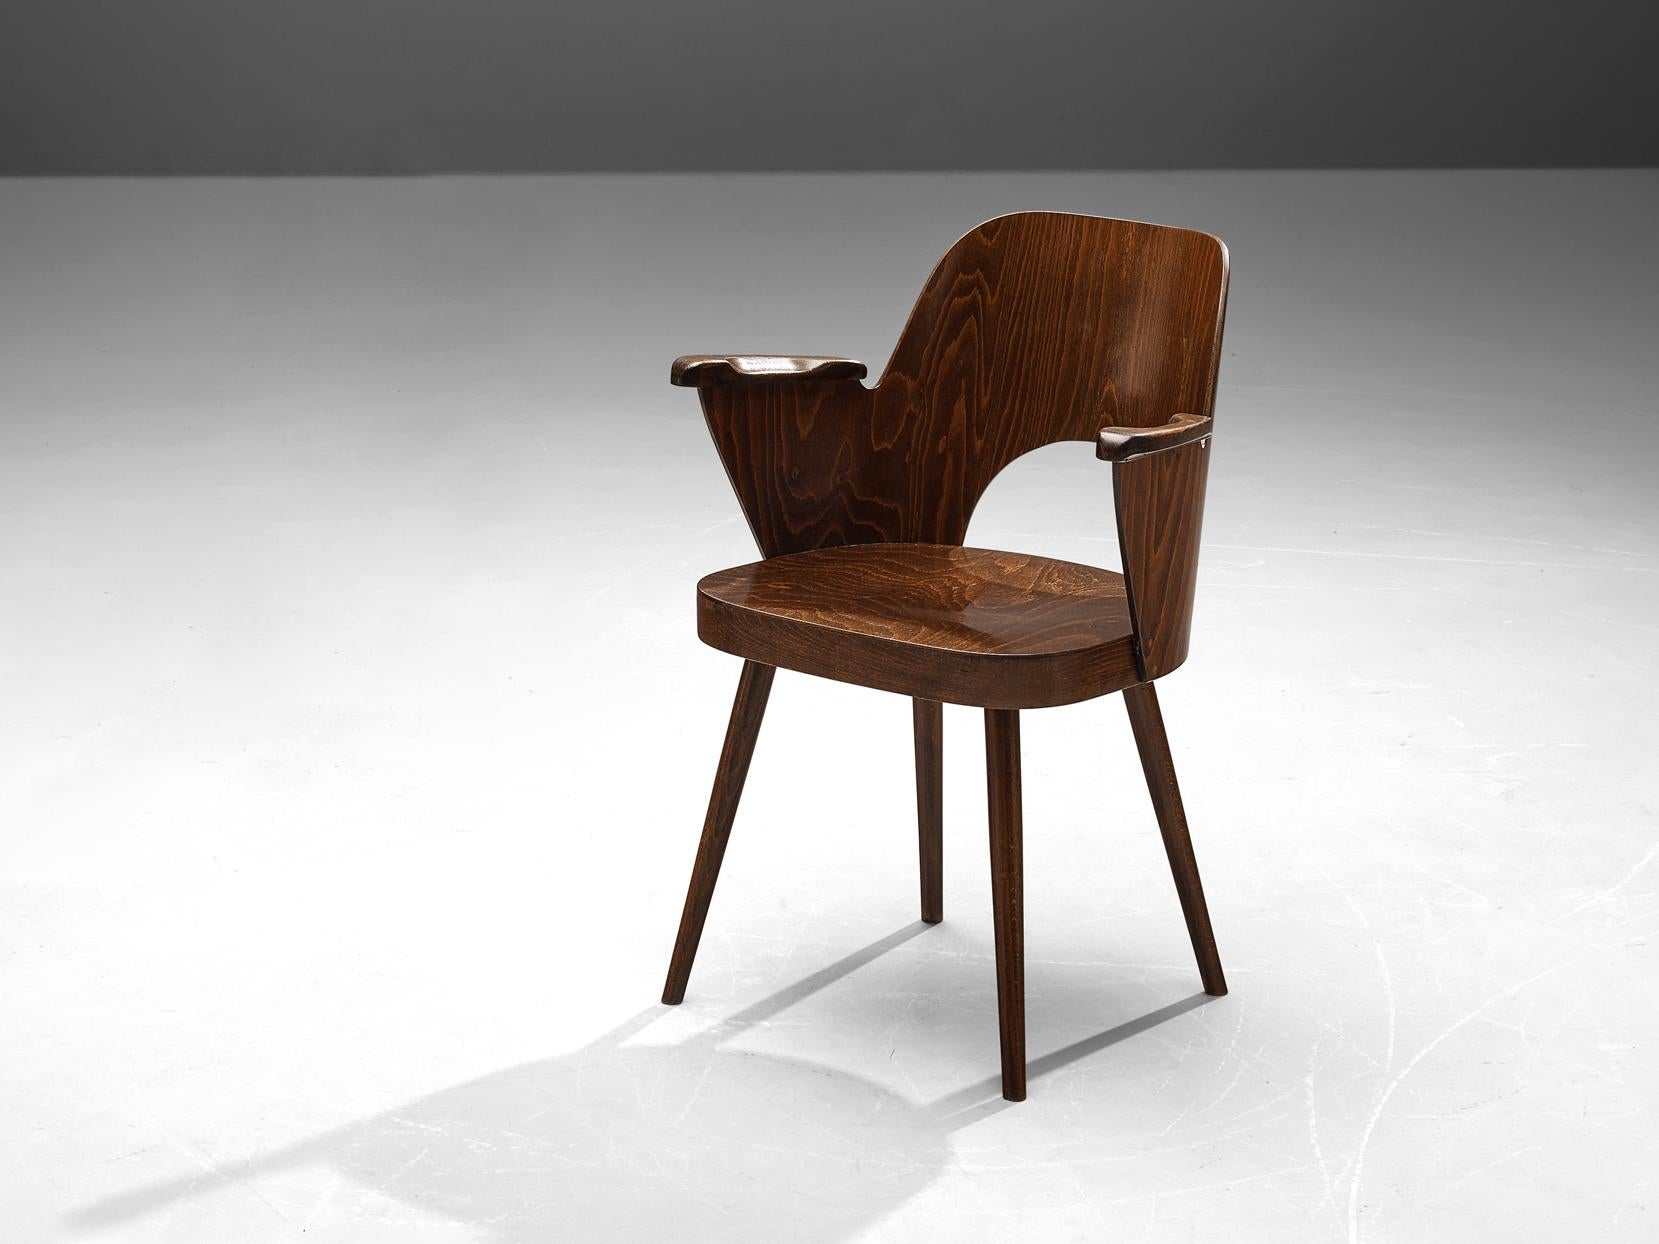 Lubomír Hofmann for TON, armchair, stained beech, Czech Republic, 1950s

This bended plywood armchair is designed by Lubomír Hofmann for the bentwood manufacturer TON. This design shows nice curves and elegant lines. While the dark brown stained